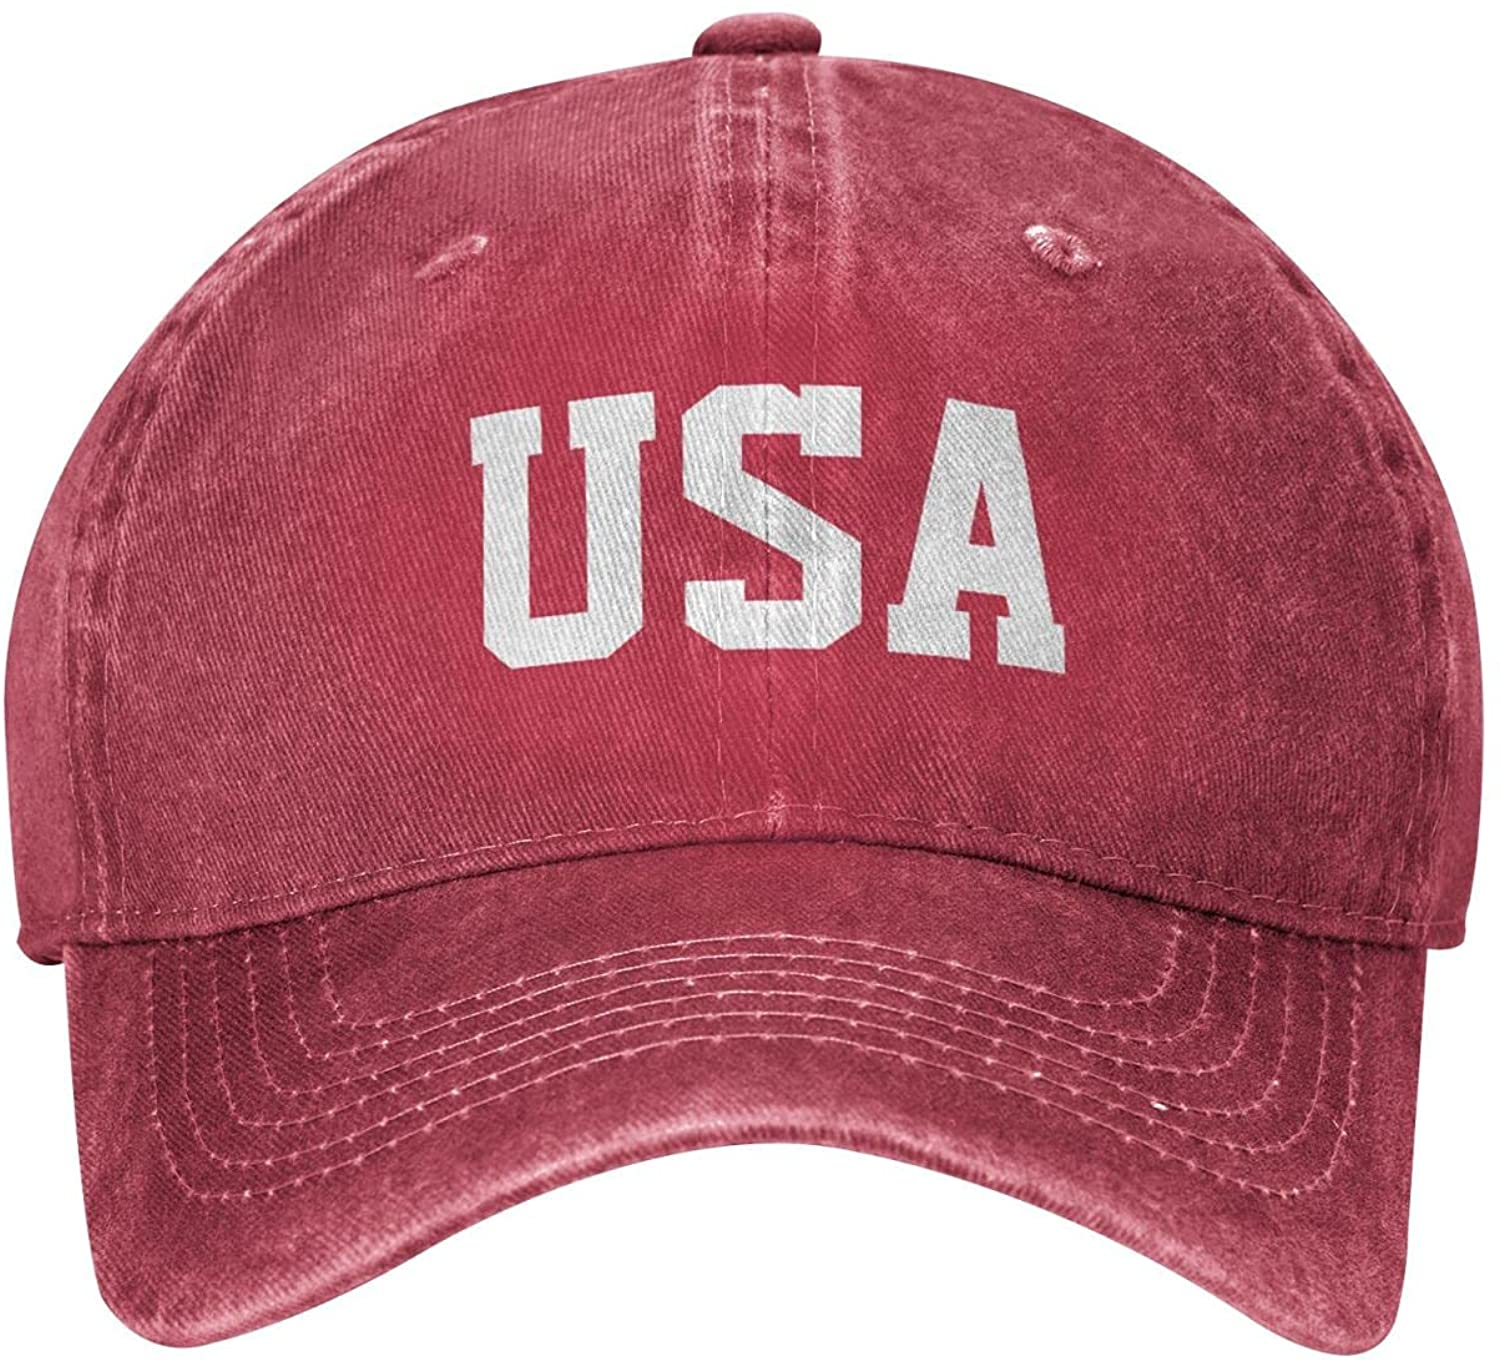 YEOSAQEI Pure Cotton Breathable Men'S USA American Flag Baseball Cap Embroidered Polo Style Military Army Hat